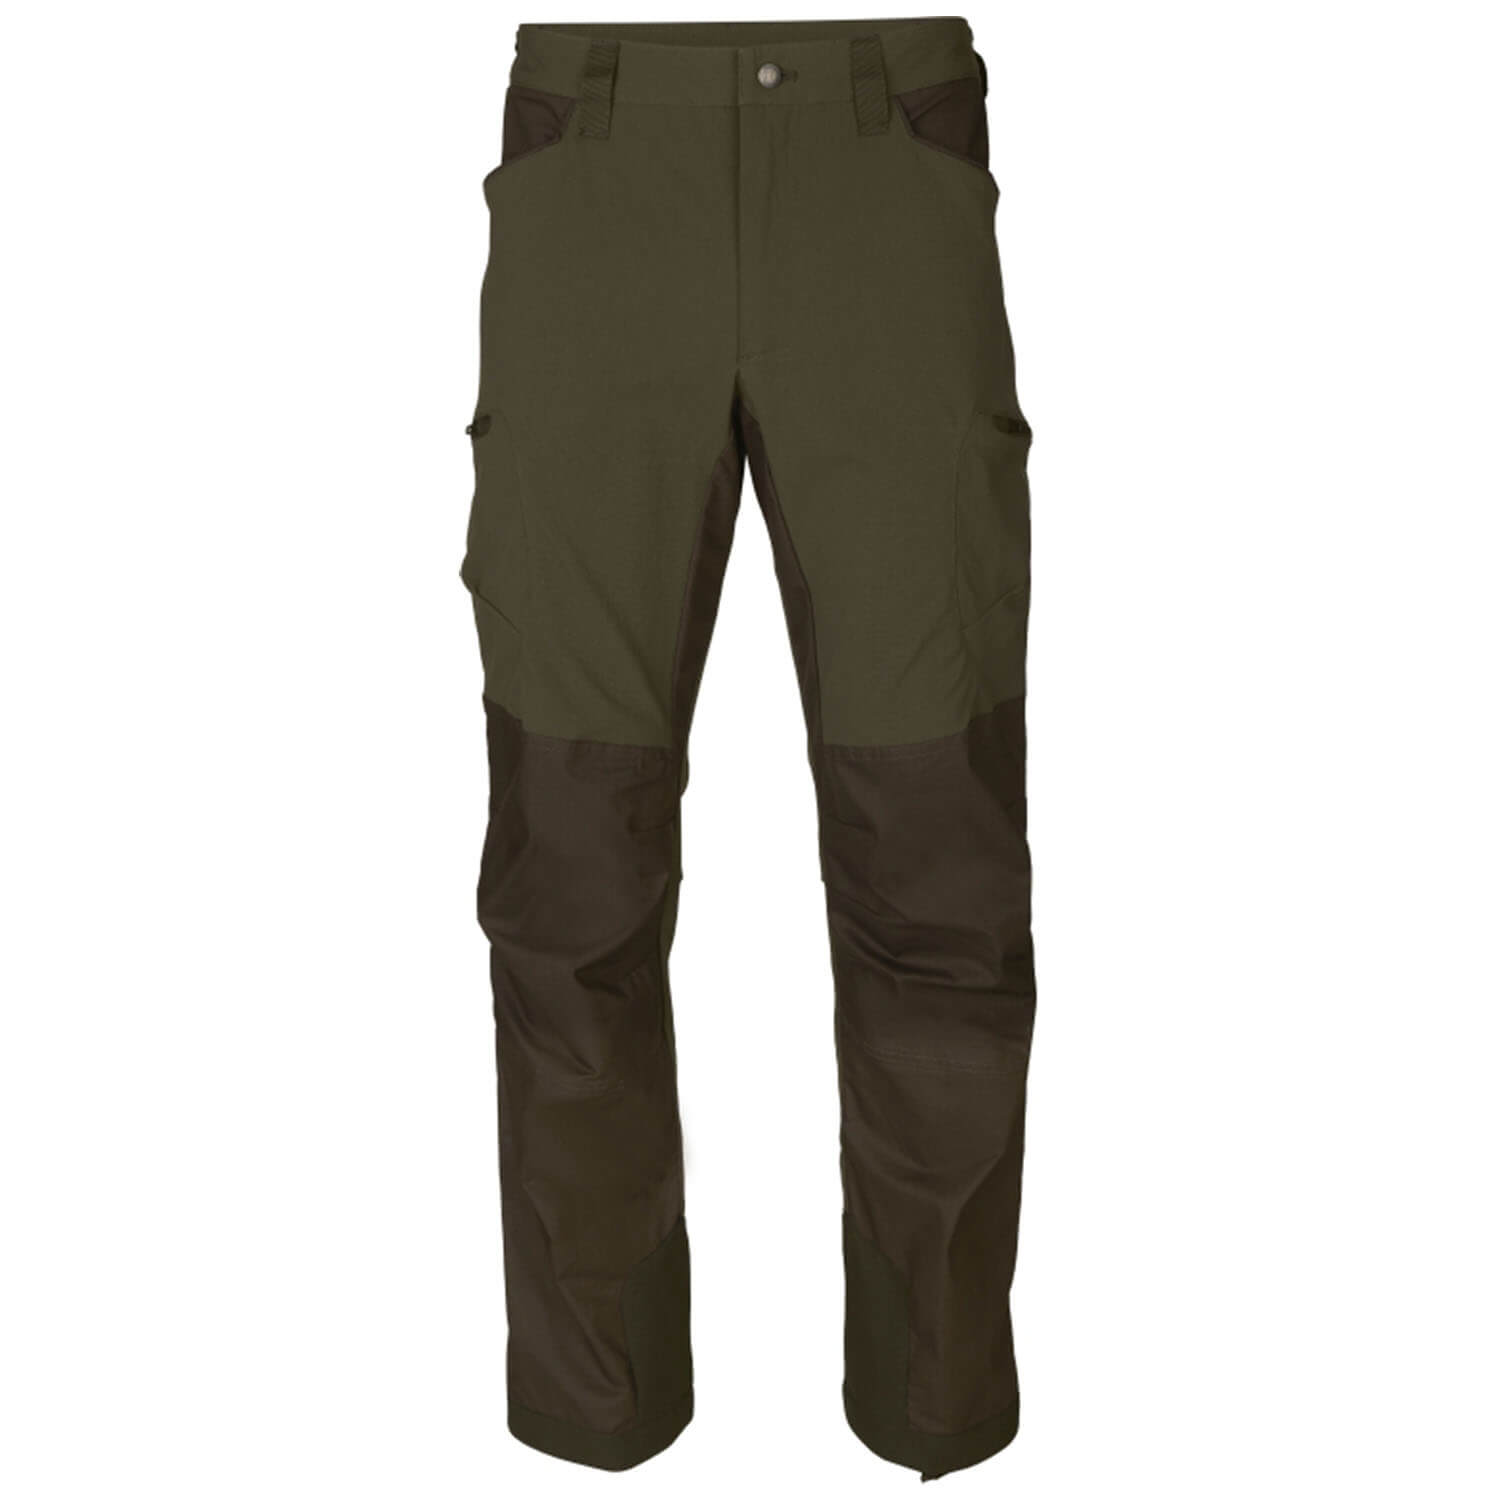 Härkila Ragnar Trousers (Willow Green) - Hunting Trousers